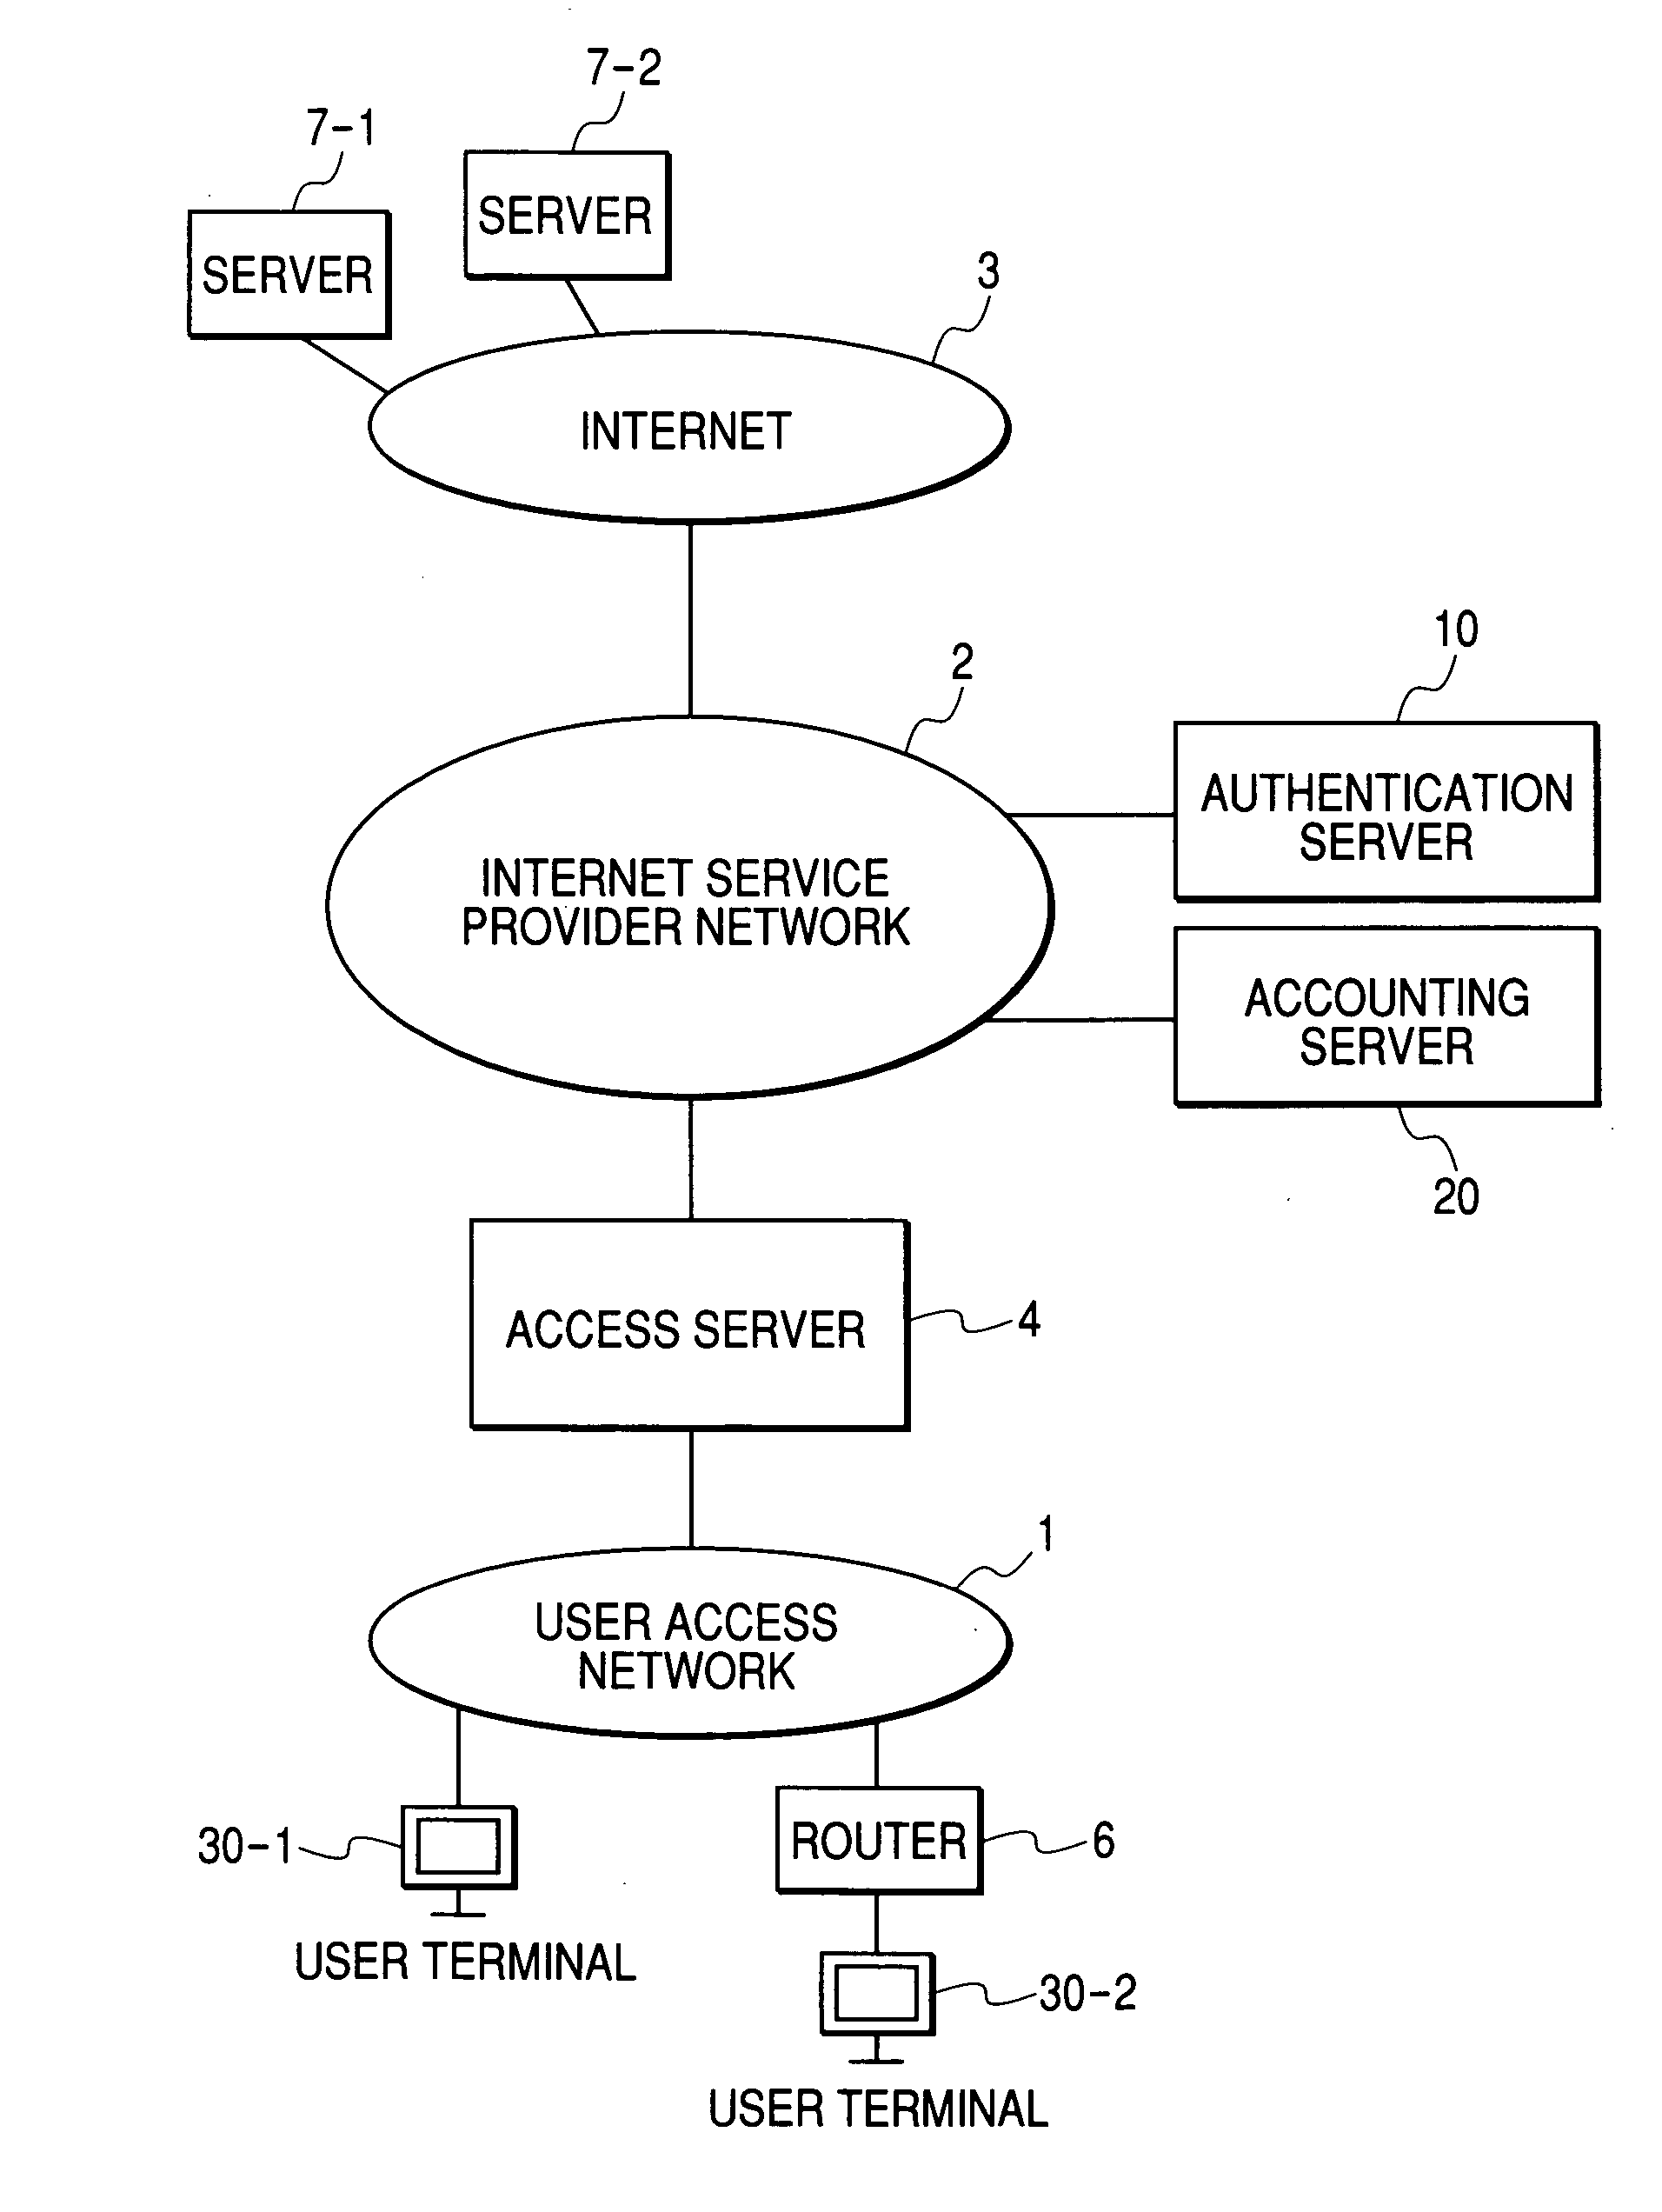 Access server with function of collecting communication statistics information